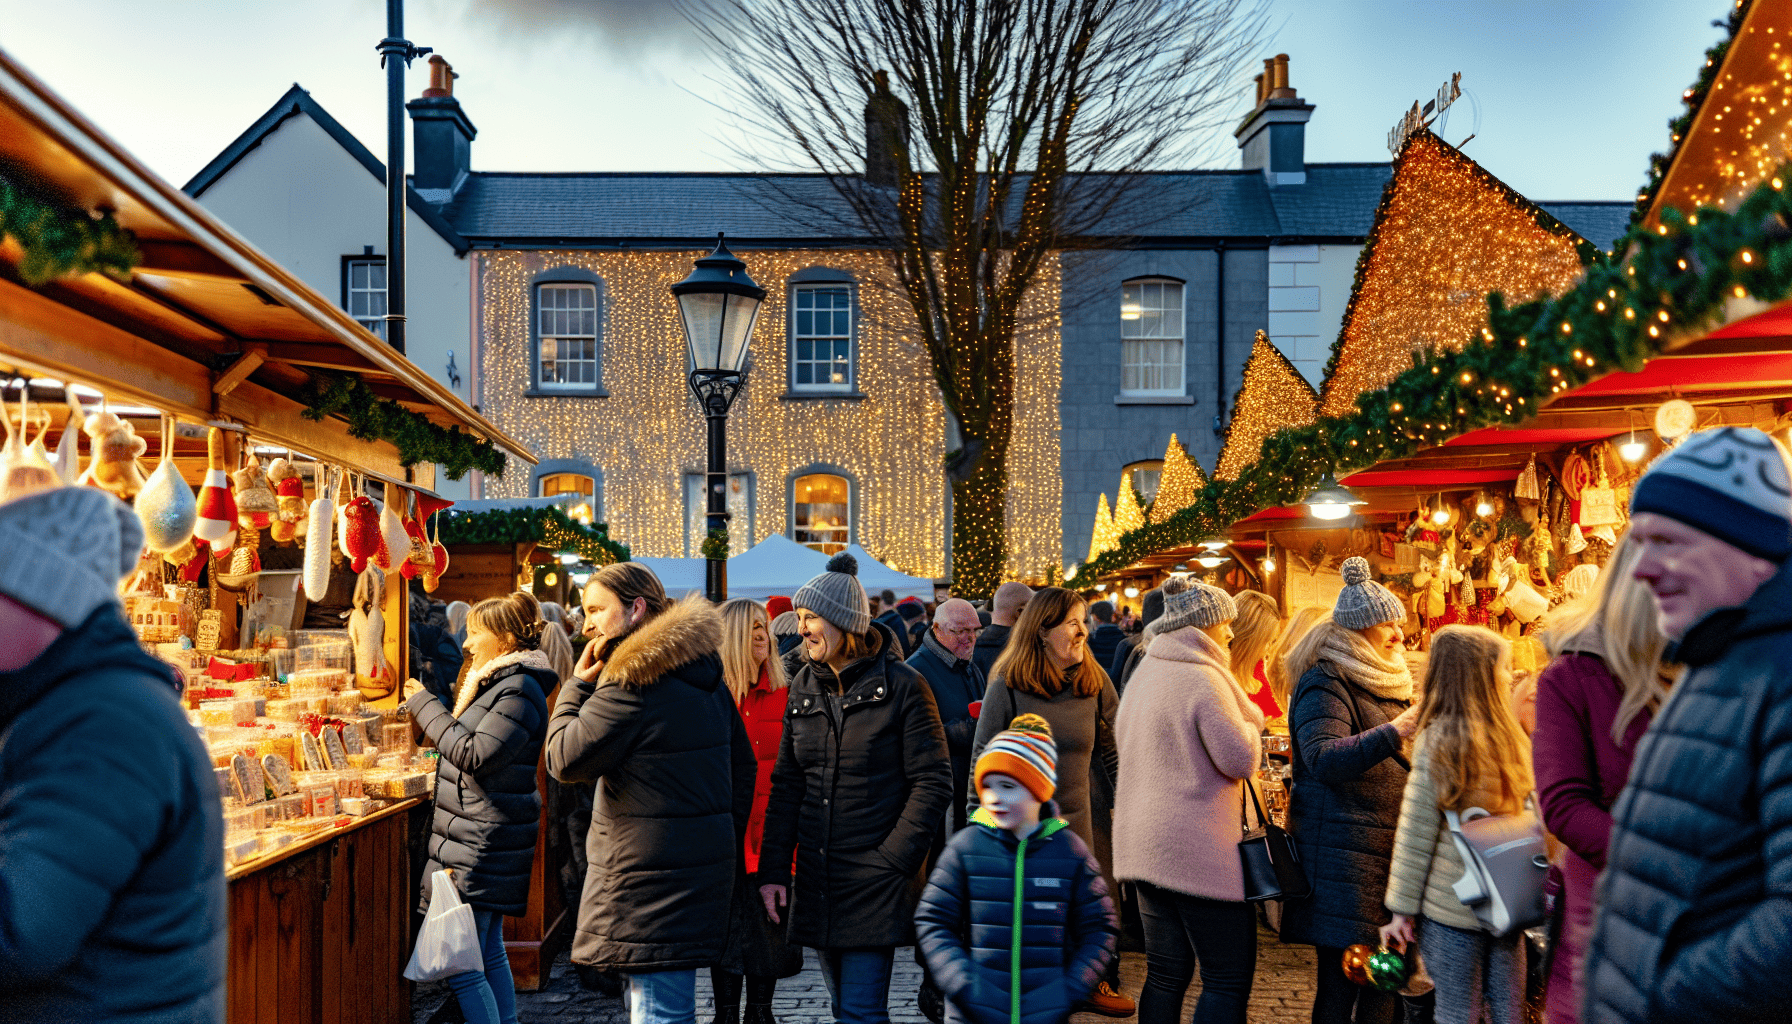 Wicklow Christmas Market with festive food and craft stalls